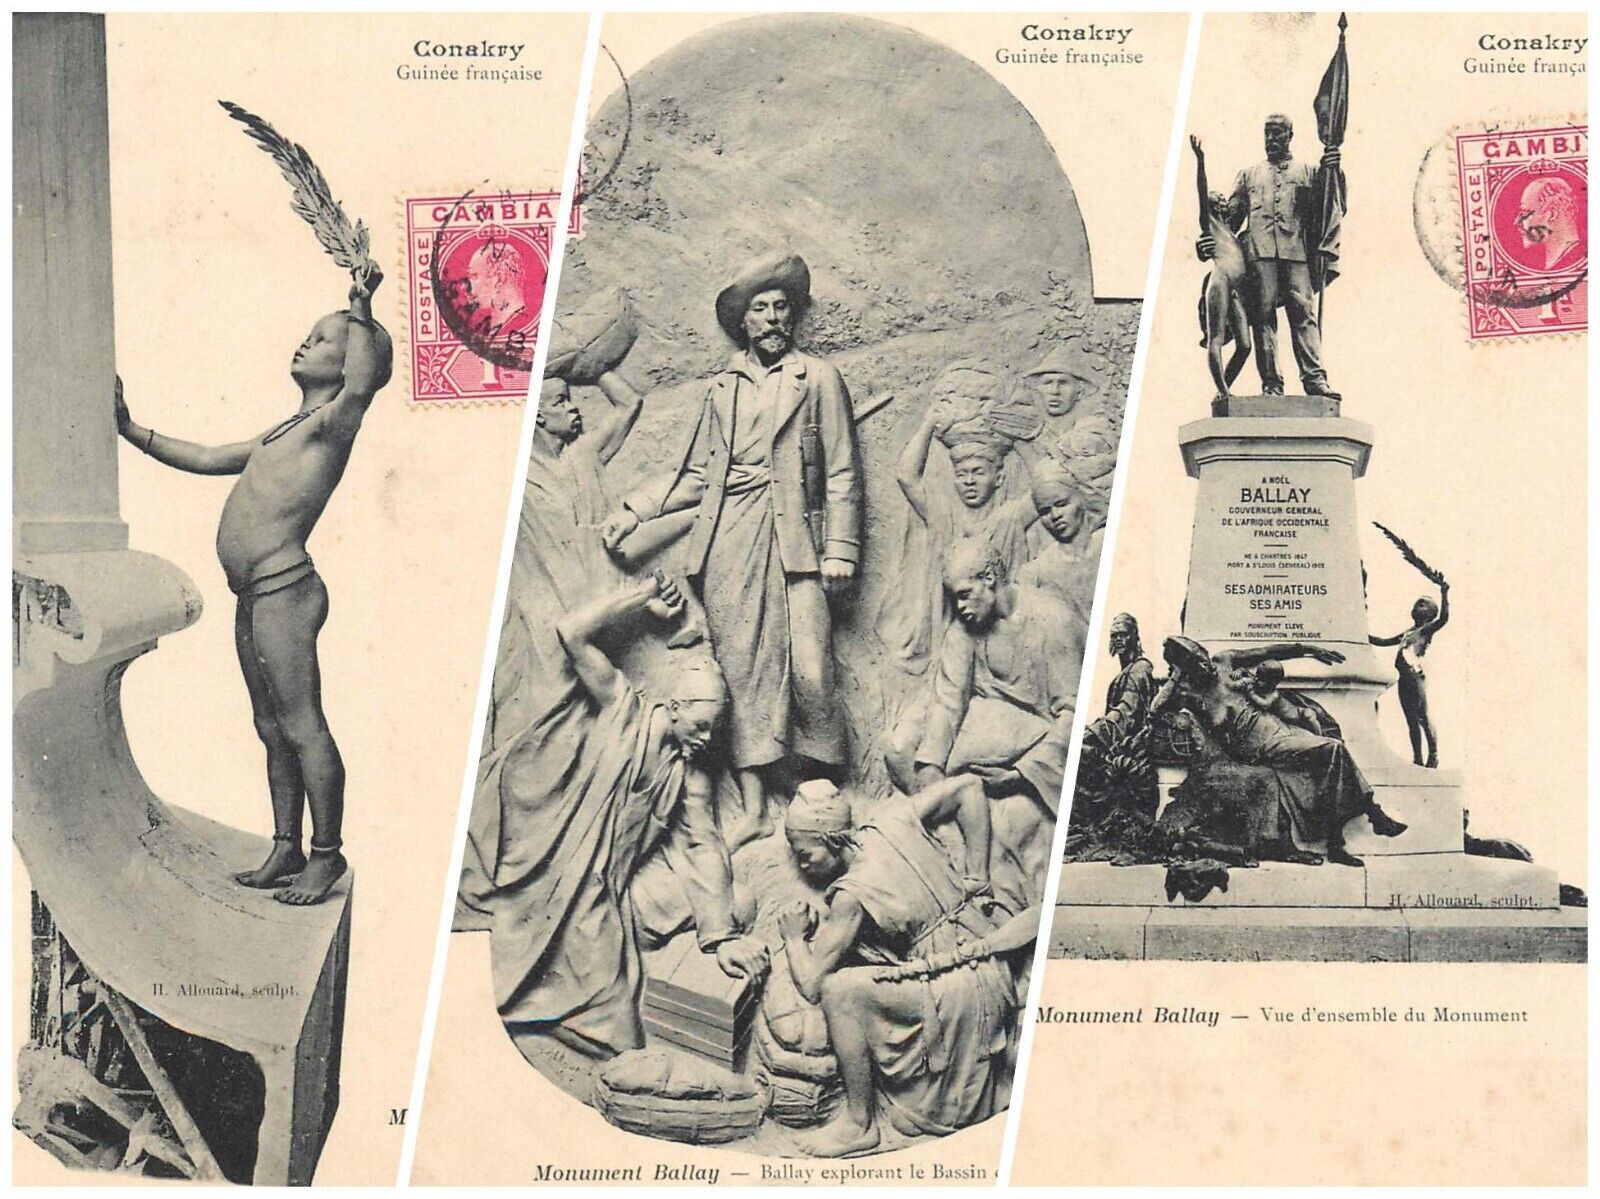 Lot of 3 postcards French Guinea Conakry Monument Ballay Gambia TCV stamps 1900s